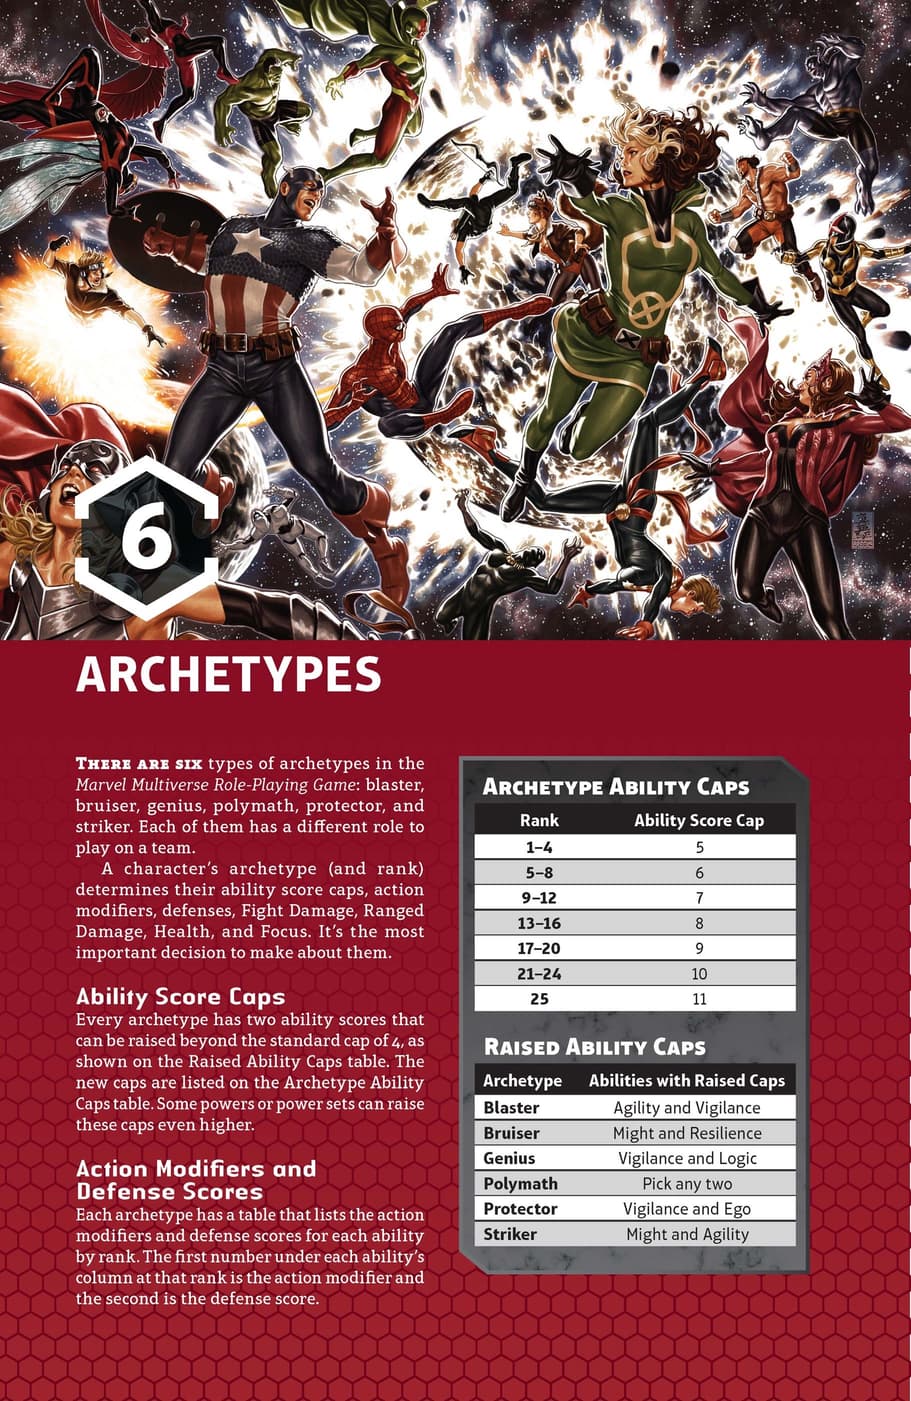 A sample of Character Archetypes from the playtest rulebook.